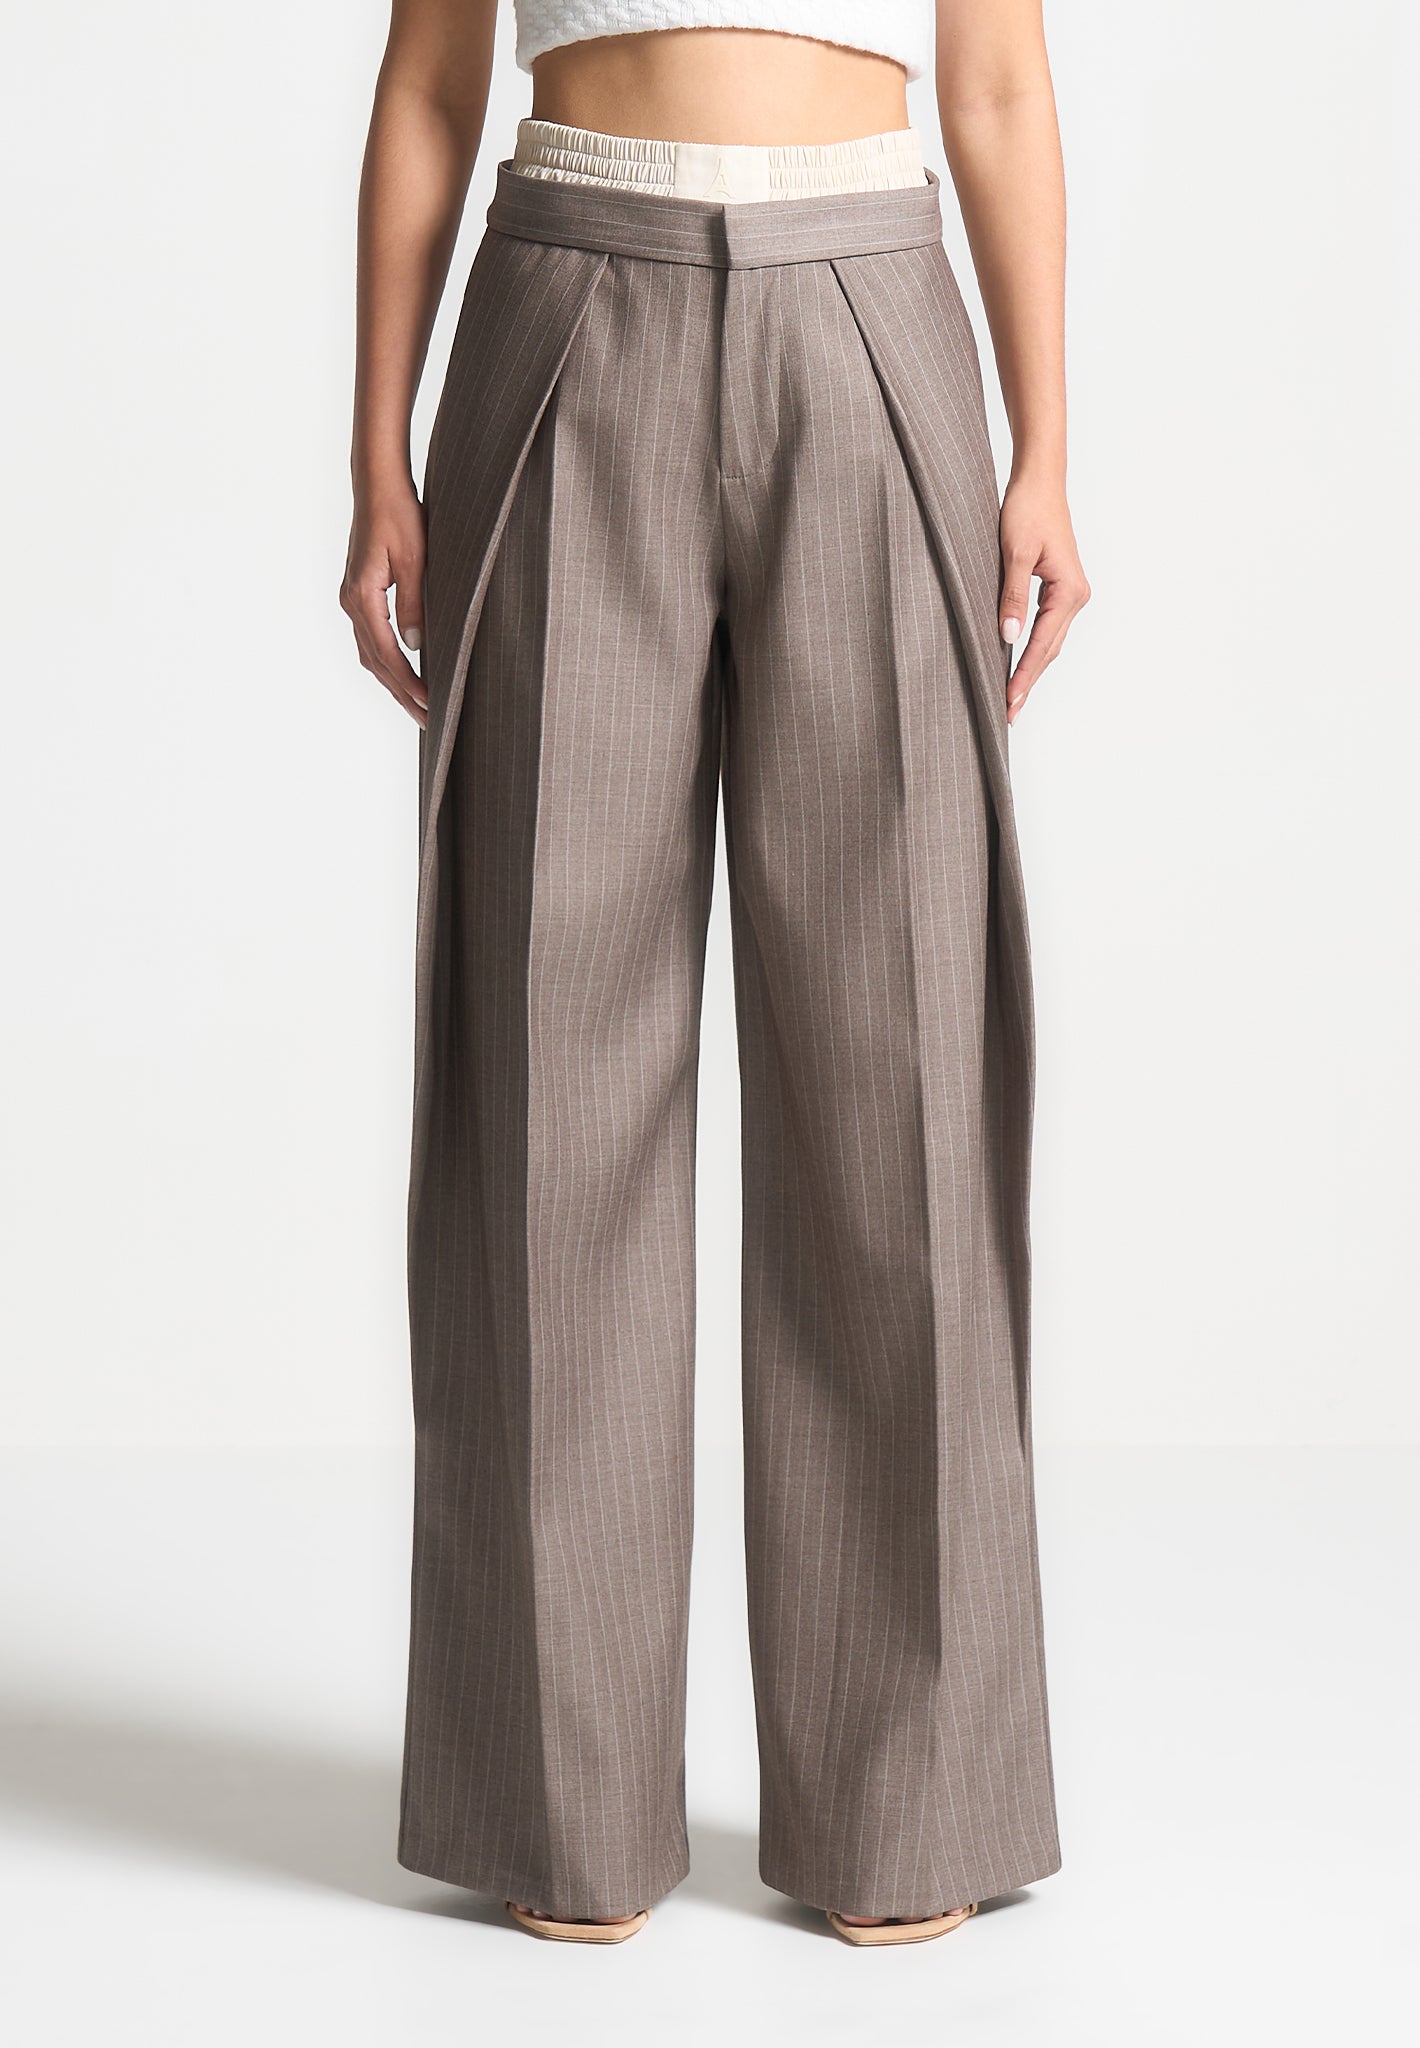 satin-waistband-pinstripe-trousers-taupe